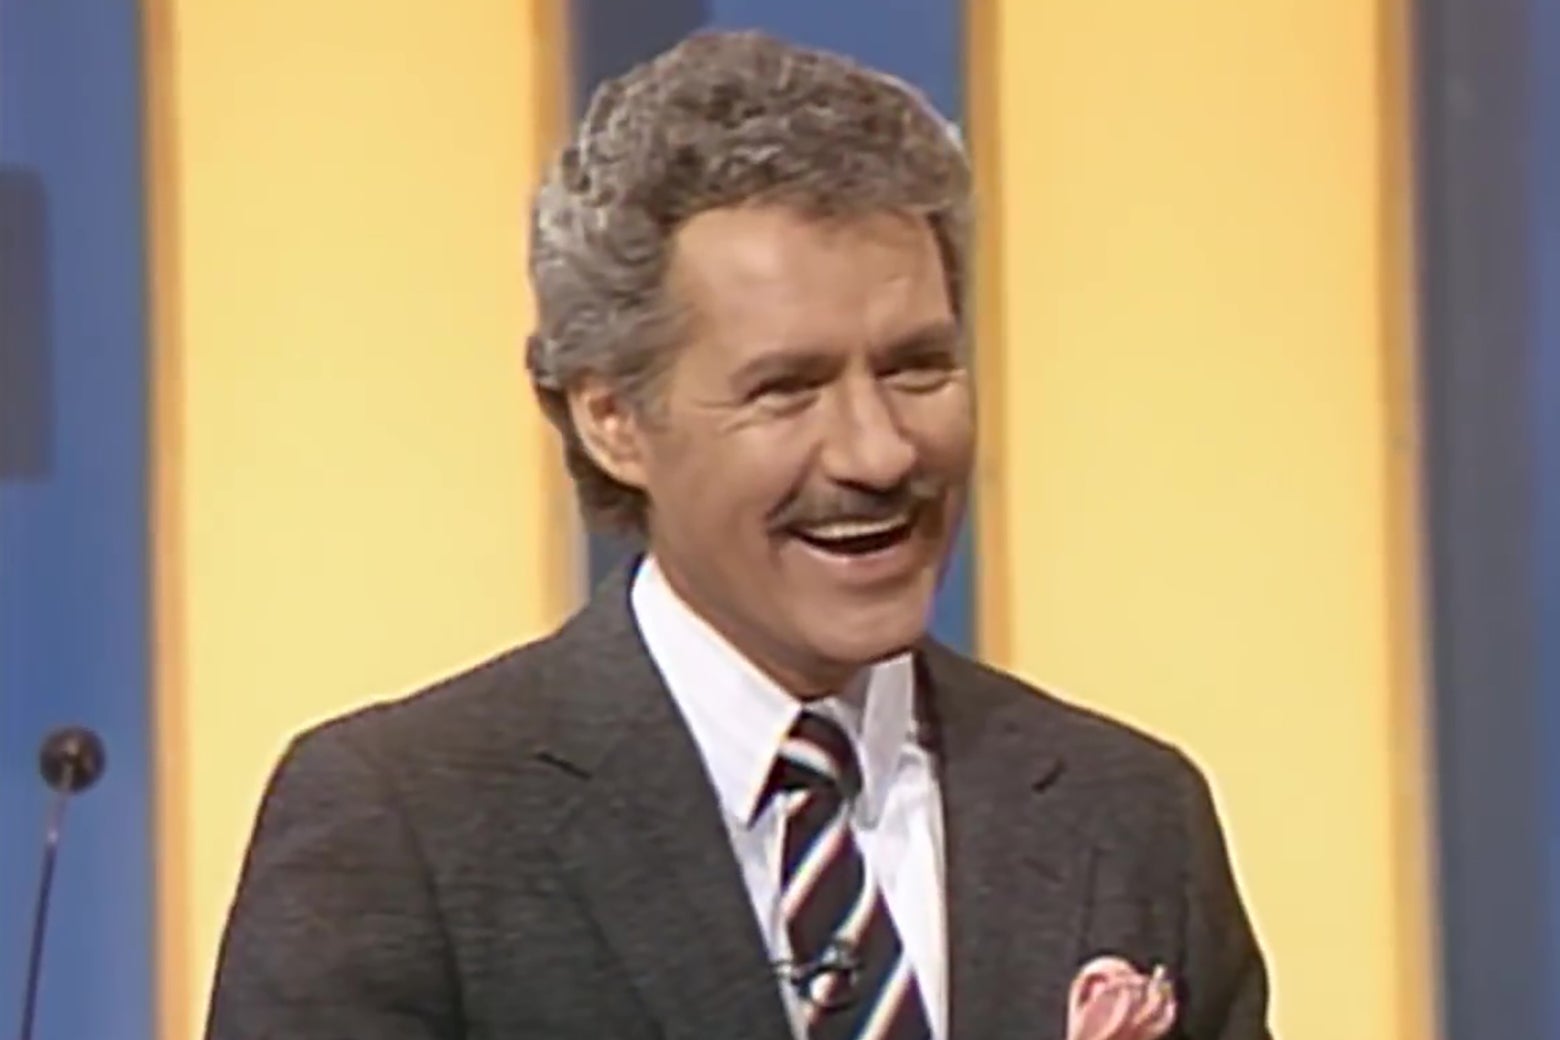 Alex Trebek, circa the 1980s, smiling broadly on the set of Jeopardy.